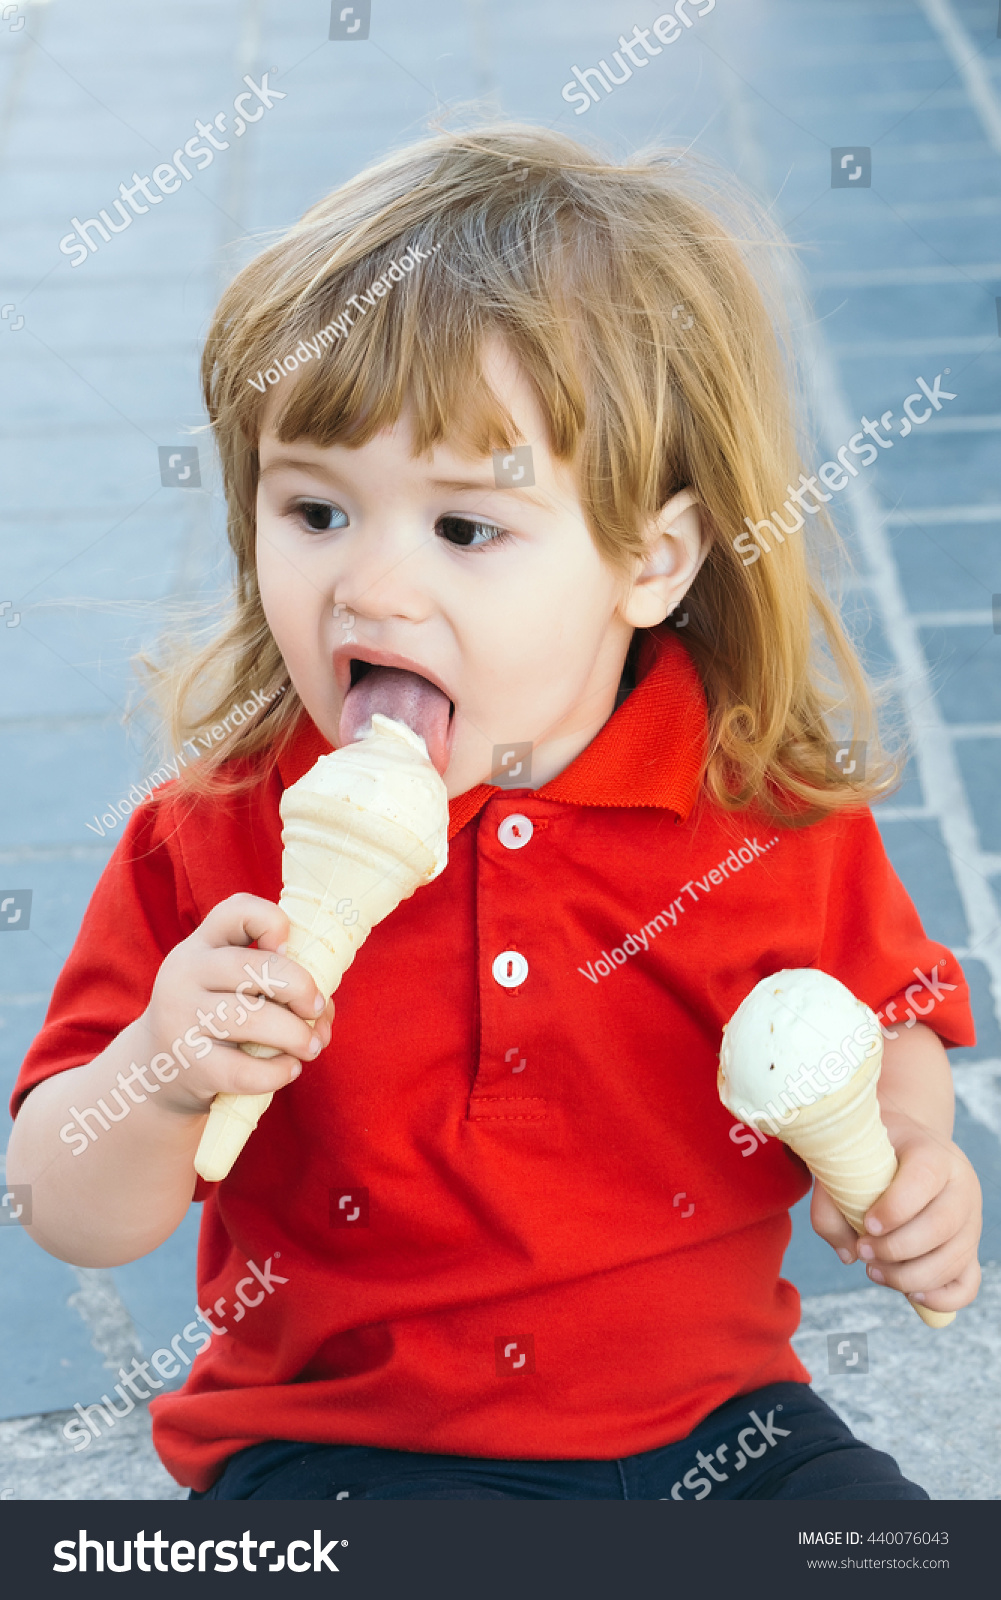 Small Funny Baby Boy Long Blonde Stock Photo Edit Now 440076043